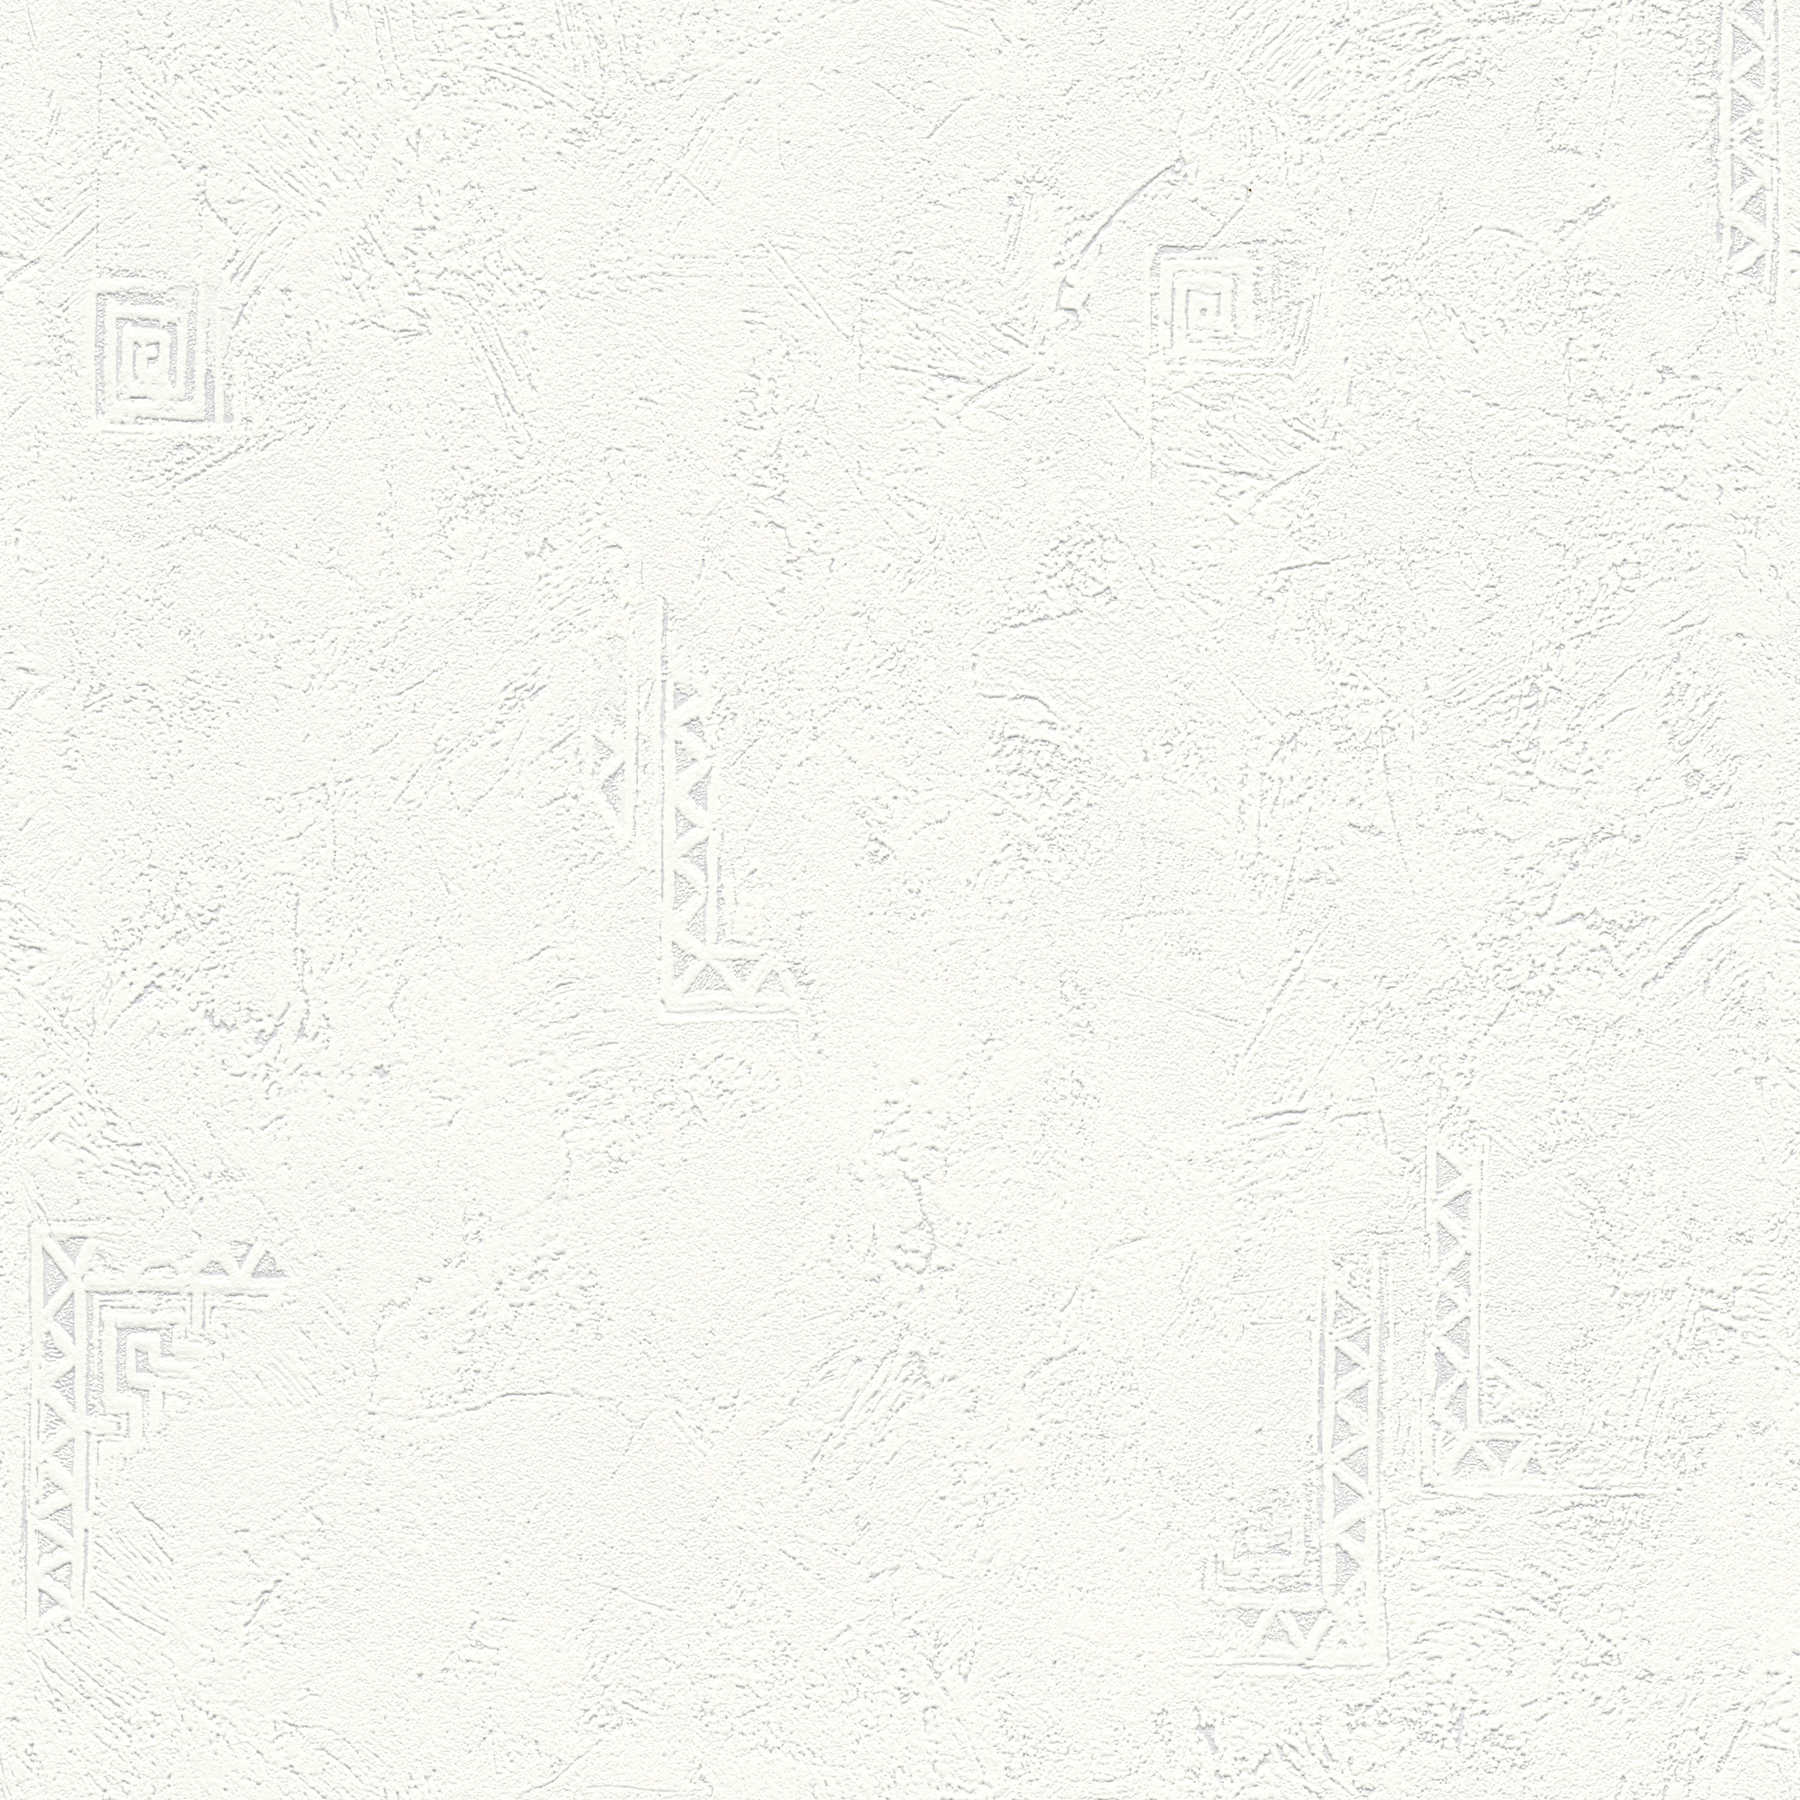 Wallpaper rough plaster texture and geometric elements - Paintable, White
